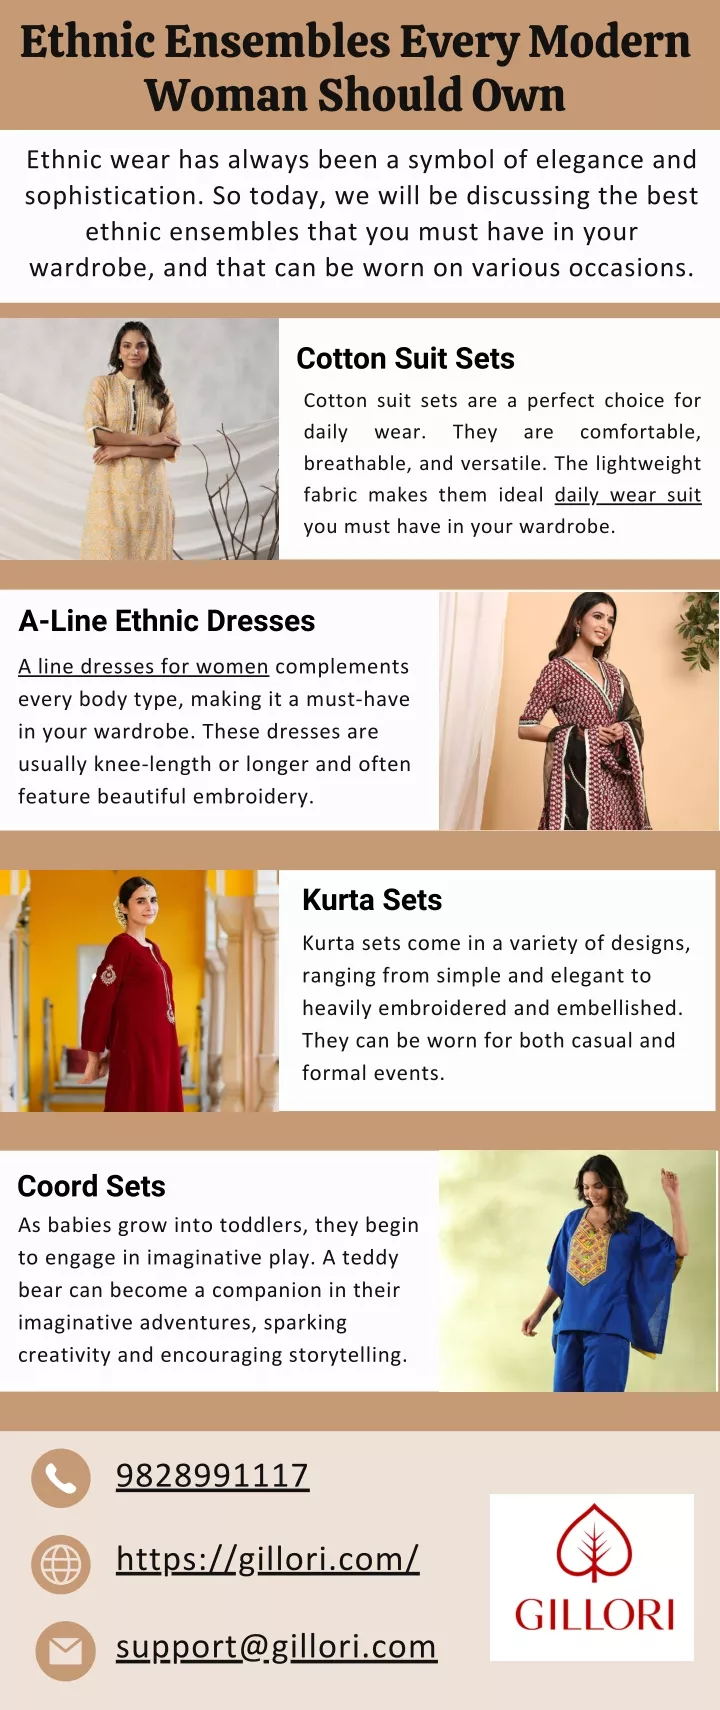 ethnic ensembles every modern woman should own